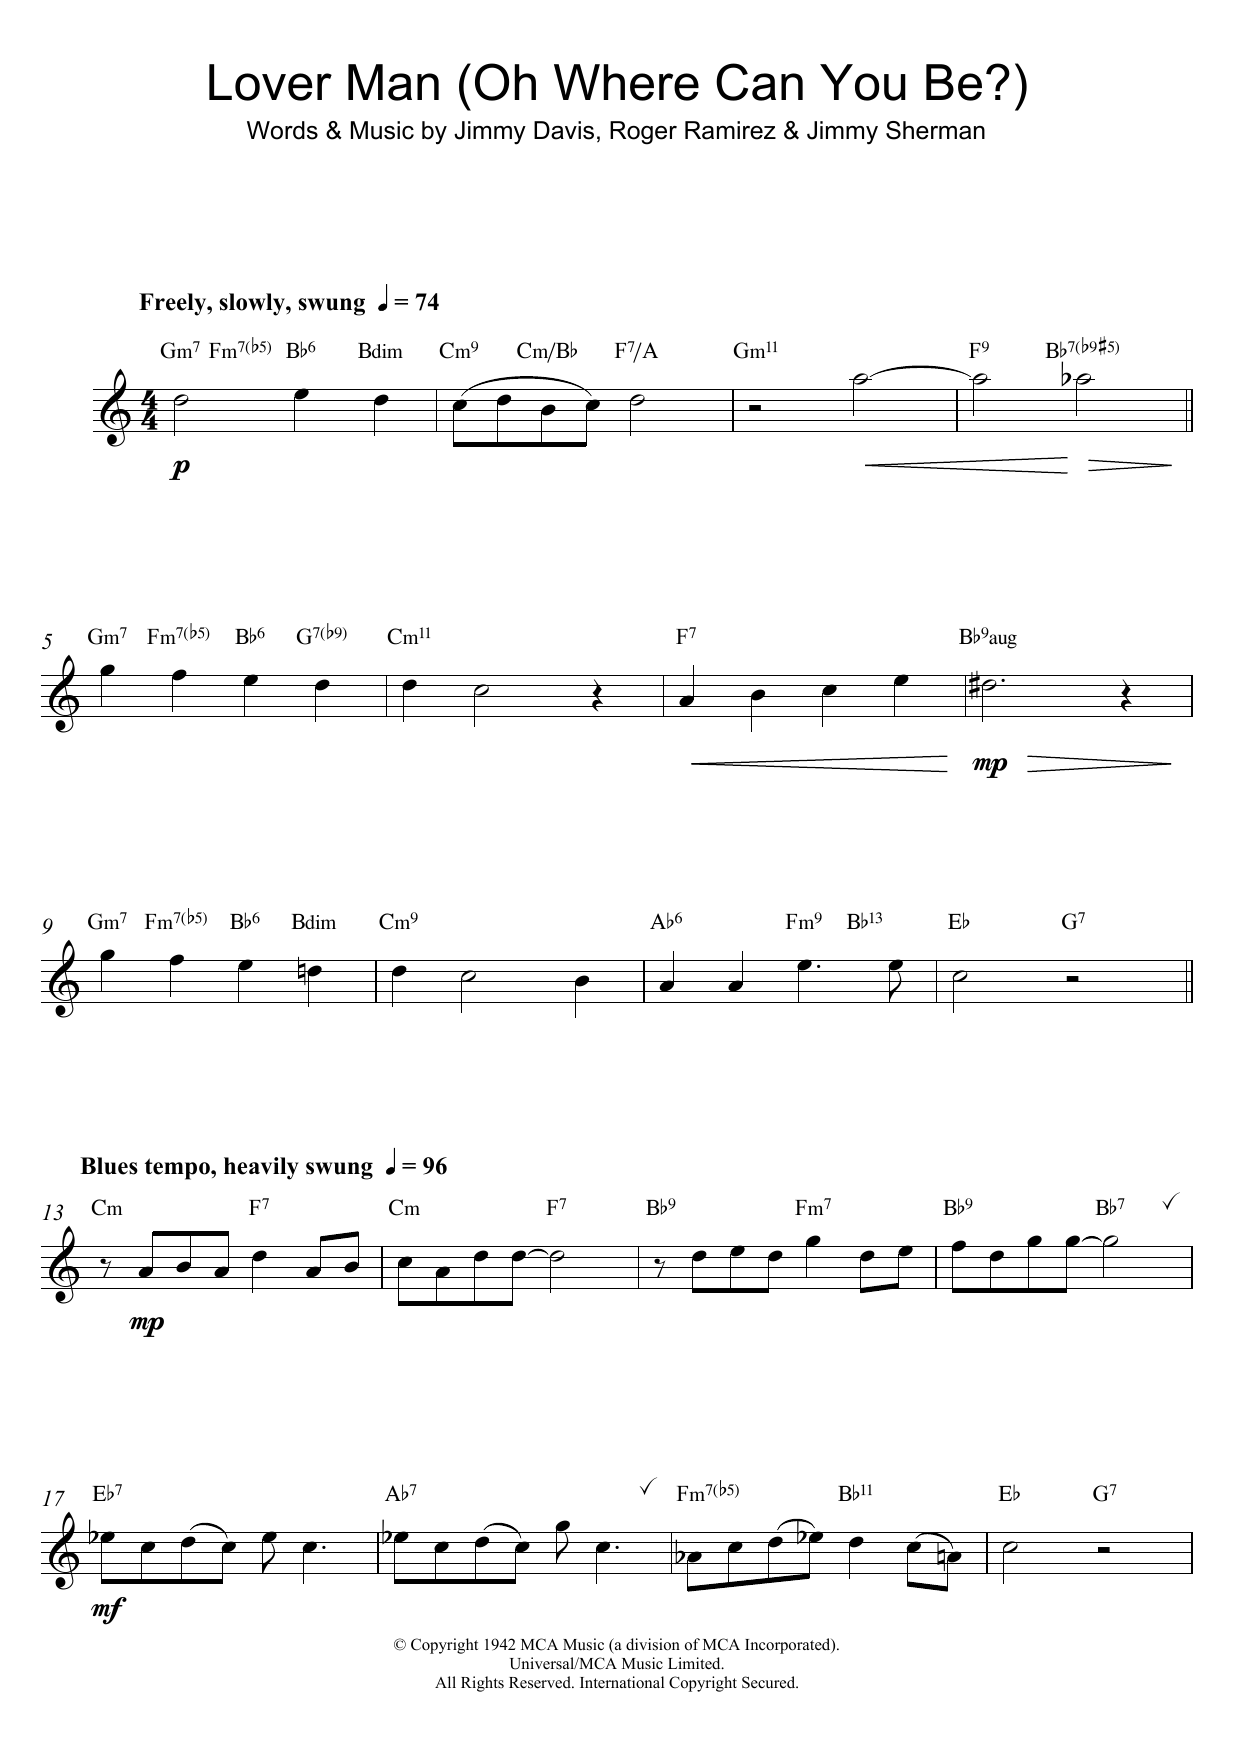 Download Bessie Smith Lover Man (Oh, Where Can You Be?) Sheet Music